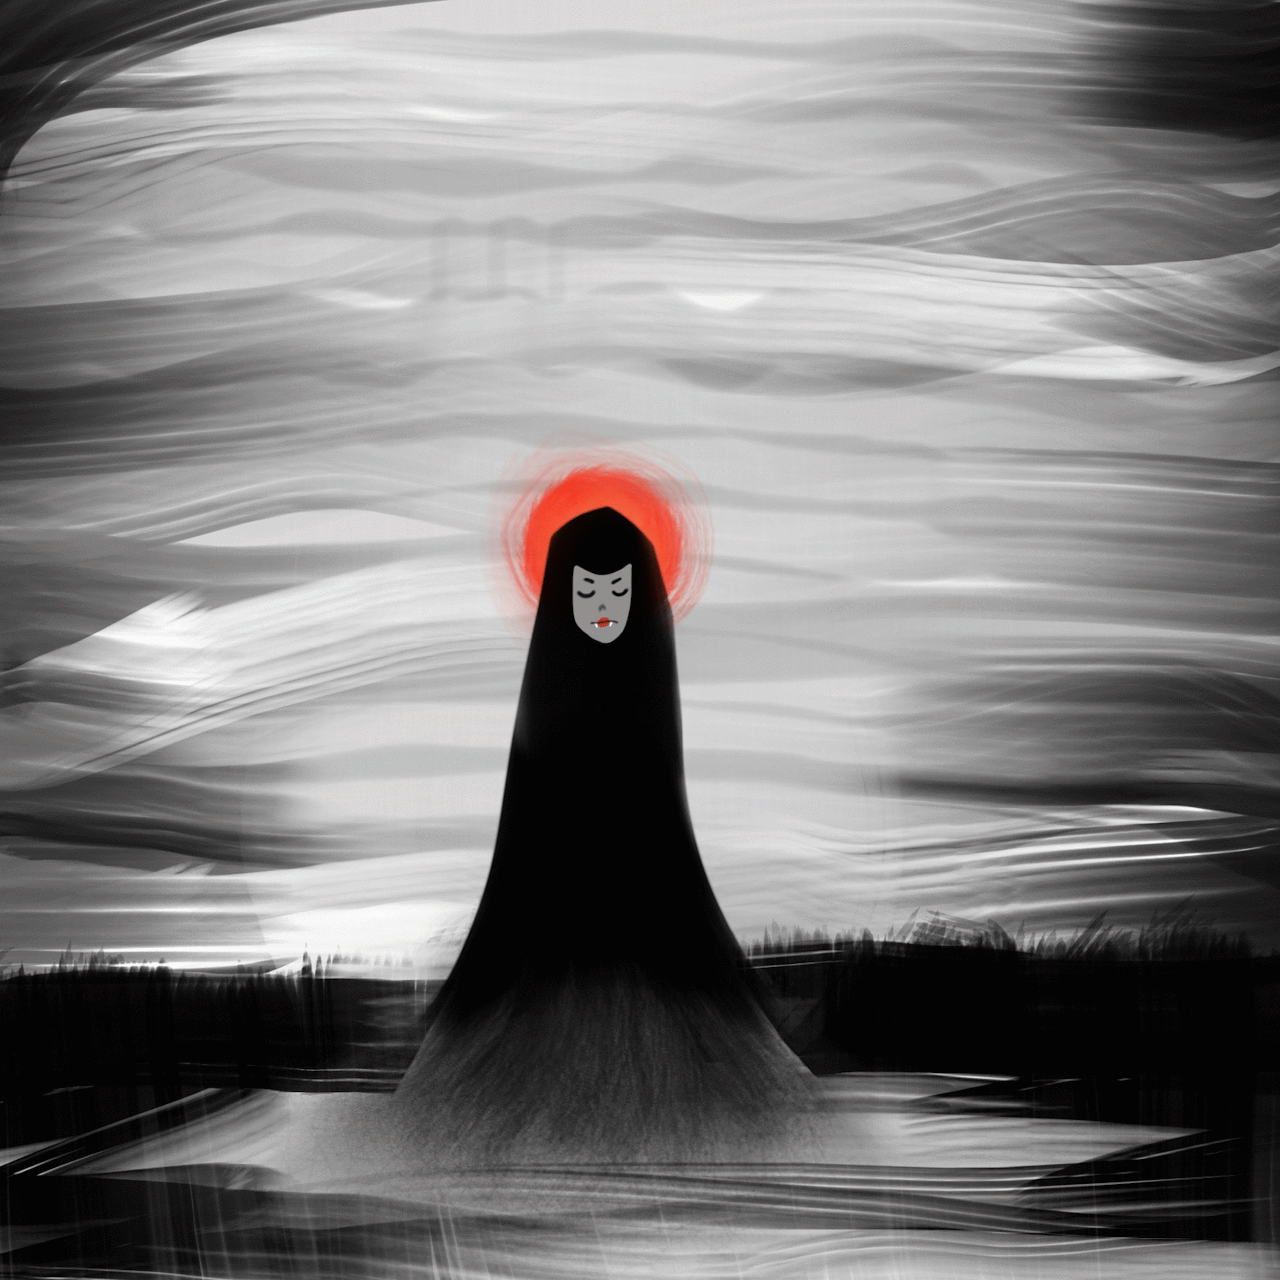 doodle,black and white,illustration,drawing,vampire,sketchbook,a girl walks home alone at night,autodesk